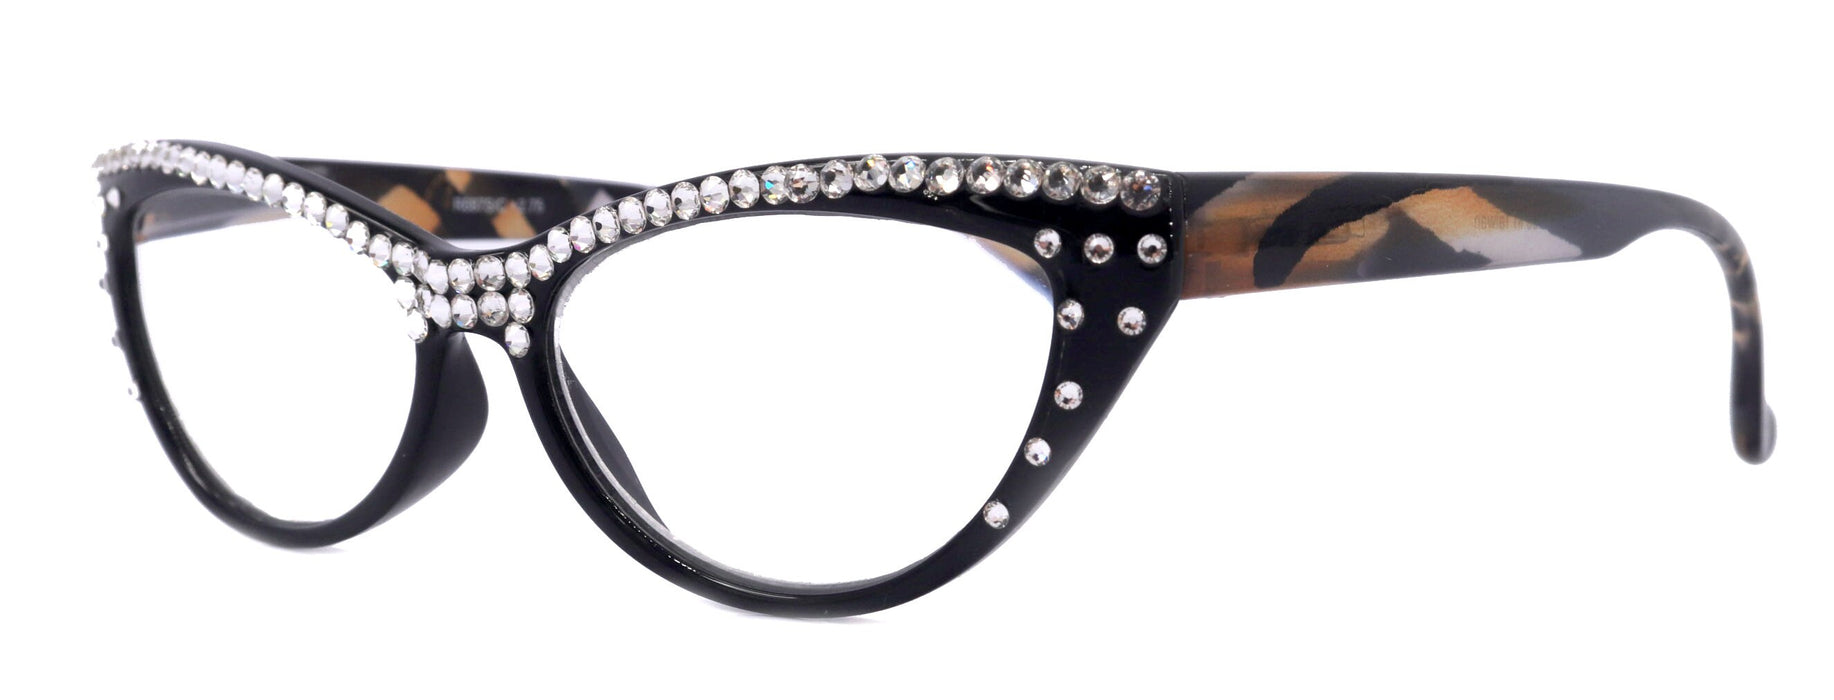 The Lynx, (Bling) Reading Glasses 4 Women W (Full Top) (Clear) Genuine European Crystals, Magnifying Cat Eye (Blk Leopard) NY Fifth Avenue